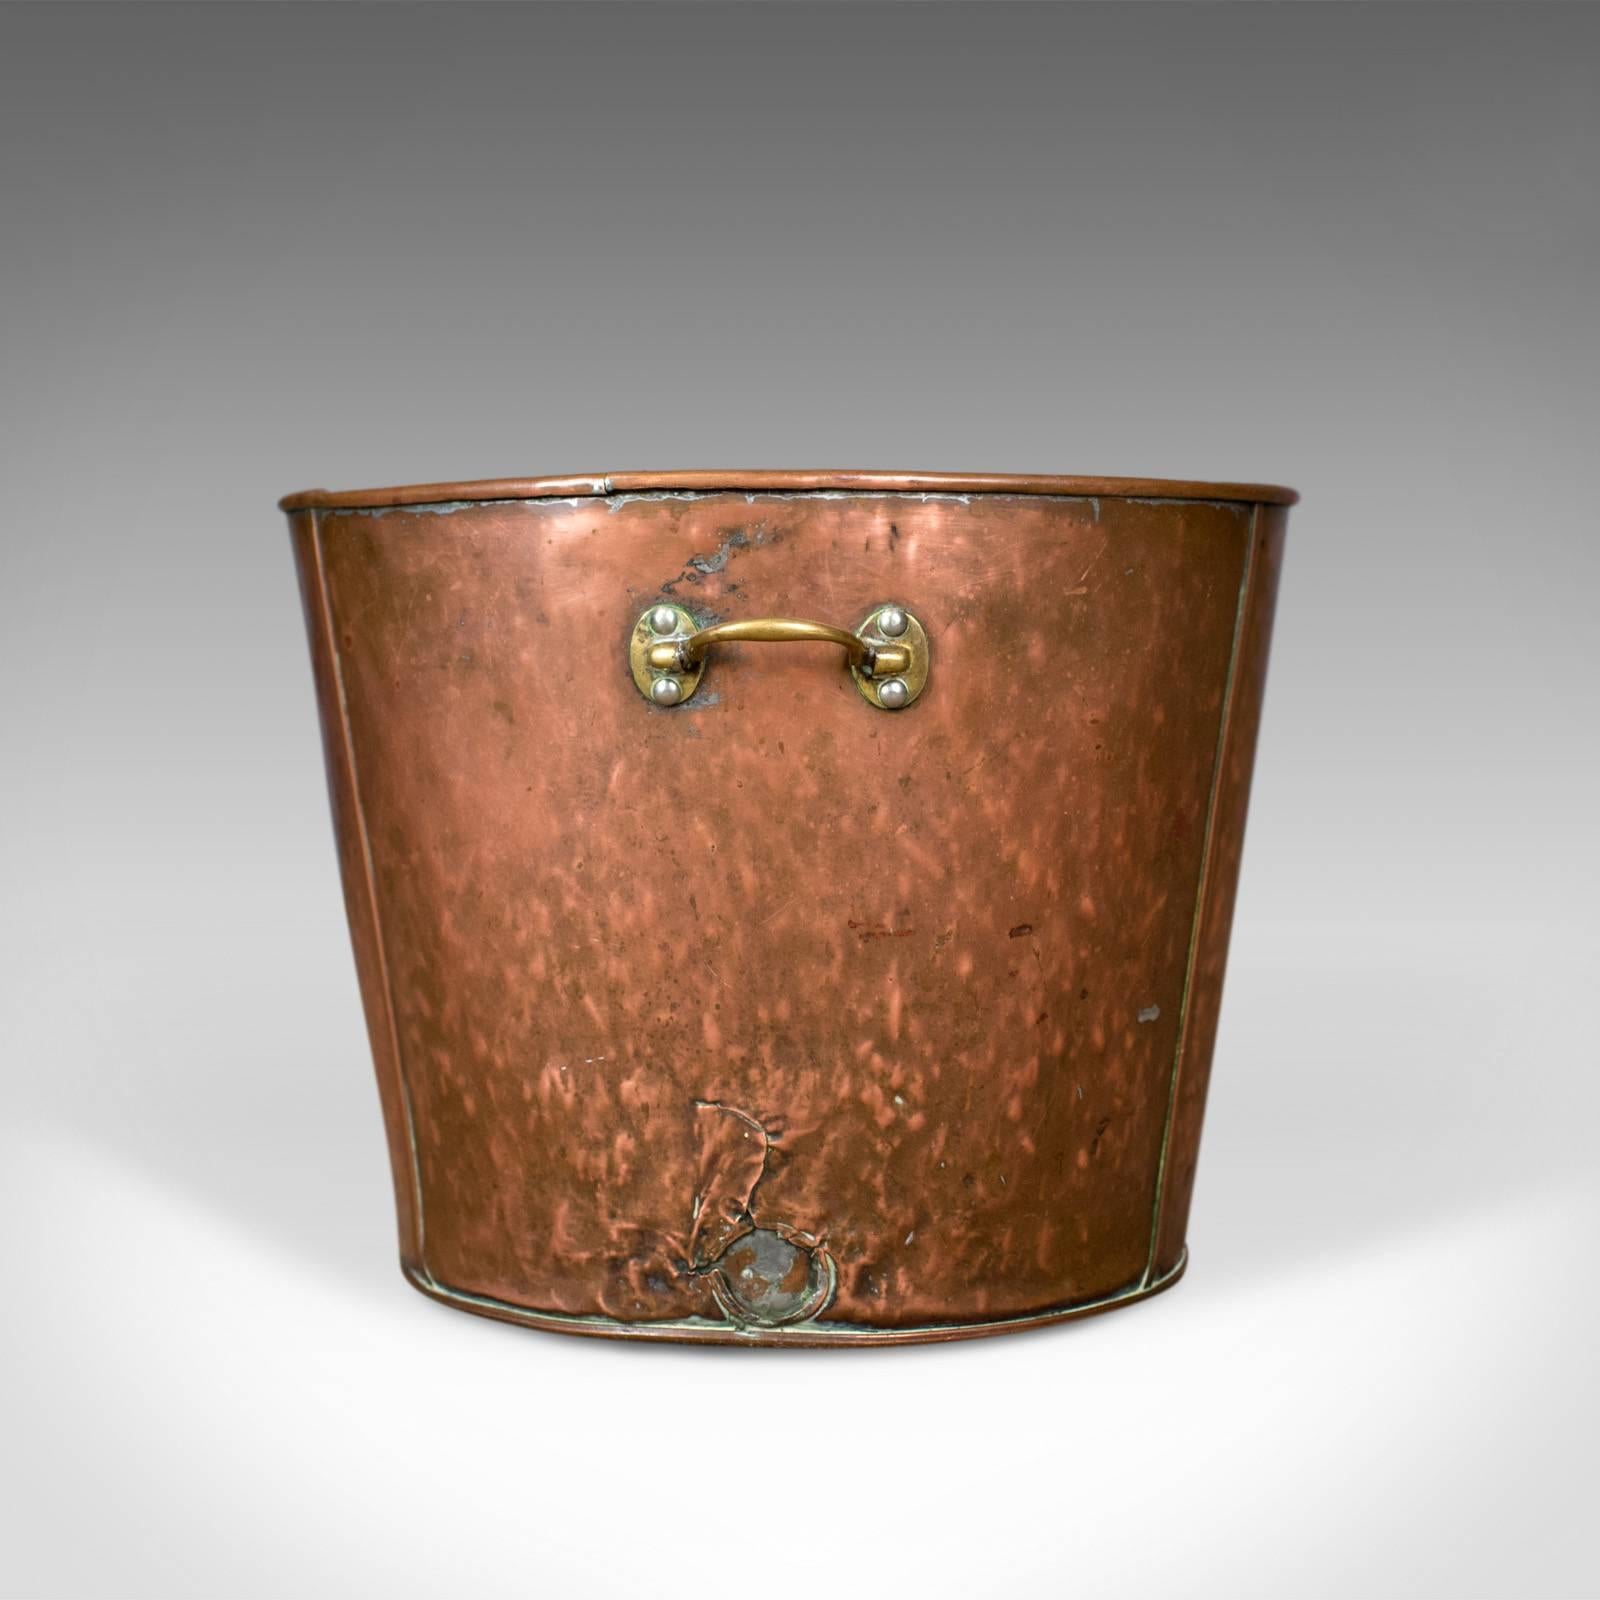 Victorian Large Antique Log Bin, English Fireside Scuttle, Coppered Finish, circa 1900